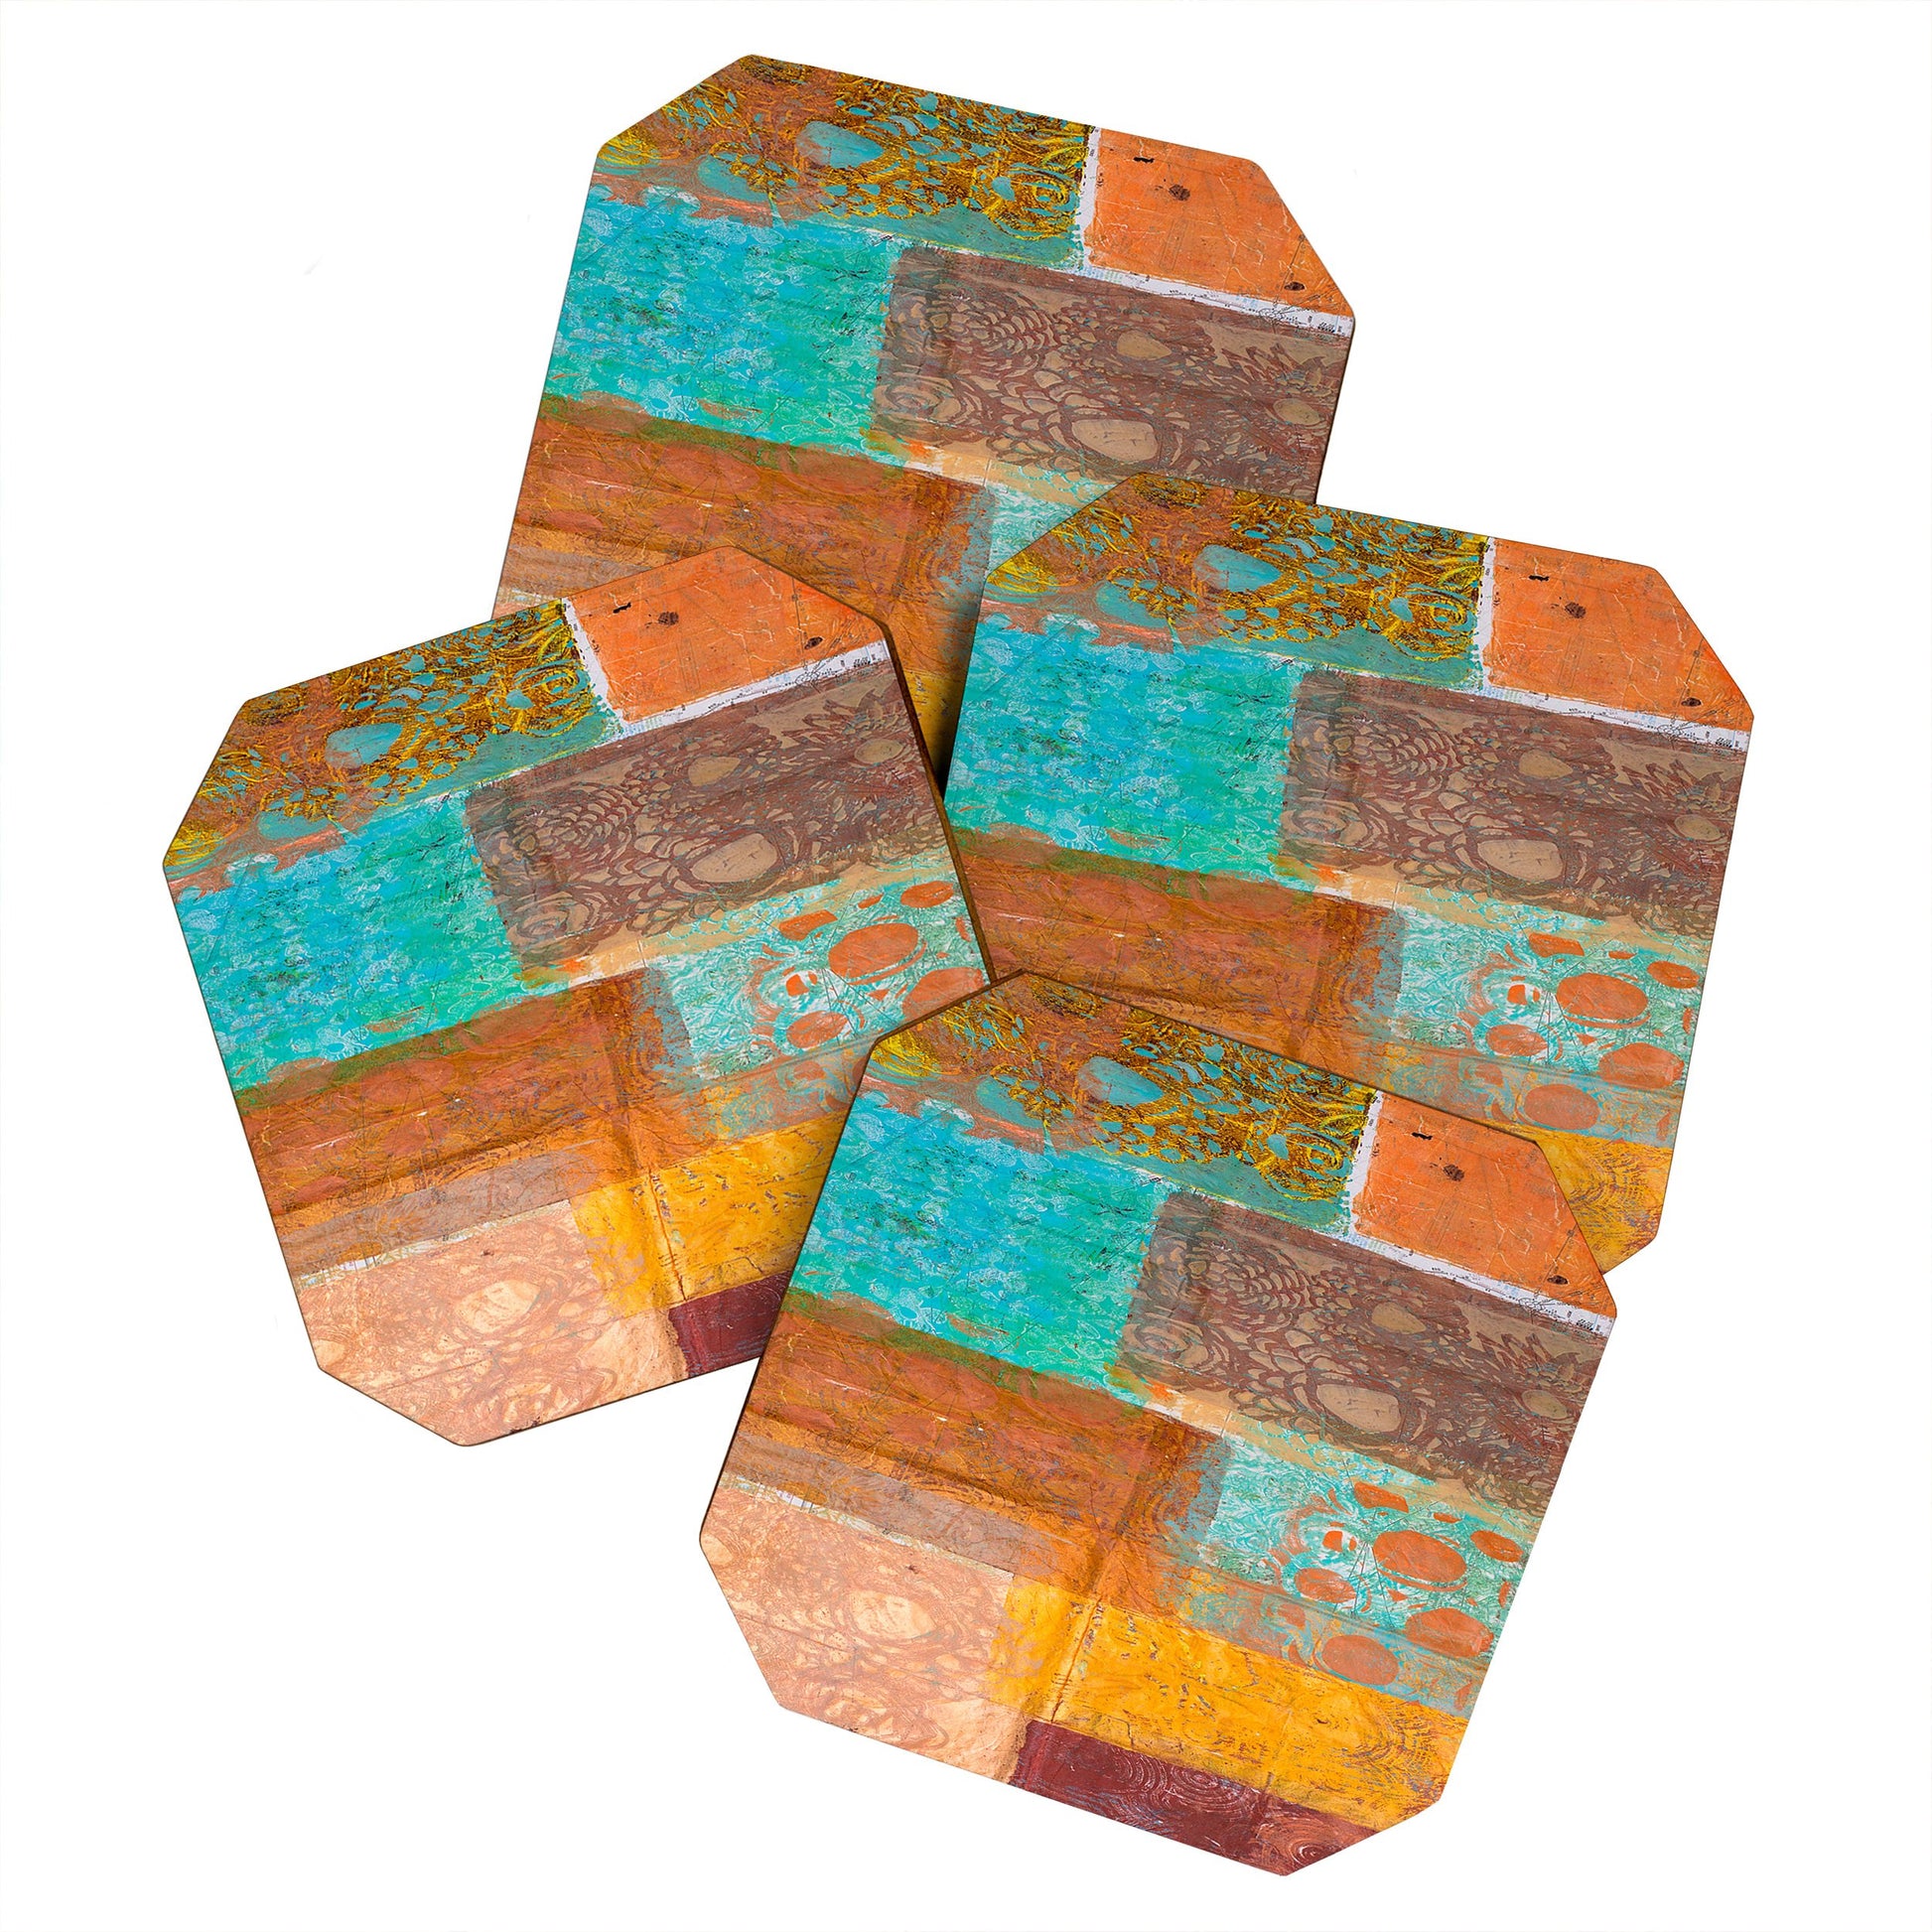 Turquoise Rustic Boards Coaster Set - bar, boards, coaster, coasters, decoration, gift, gift idead, gift ideas, home, home decor, homedecor, photo, photography, rustic, rustic coasters, southwestern, southwesterndecor, southwesternhomedecor, sunrise, turquoise, turquoise boards, western, western decor, western home decor, westerndecor, westernhomedecor -  - Baha Ranch Western Wear